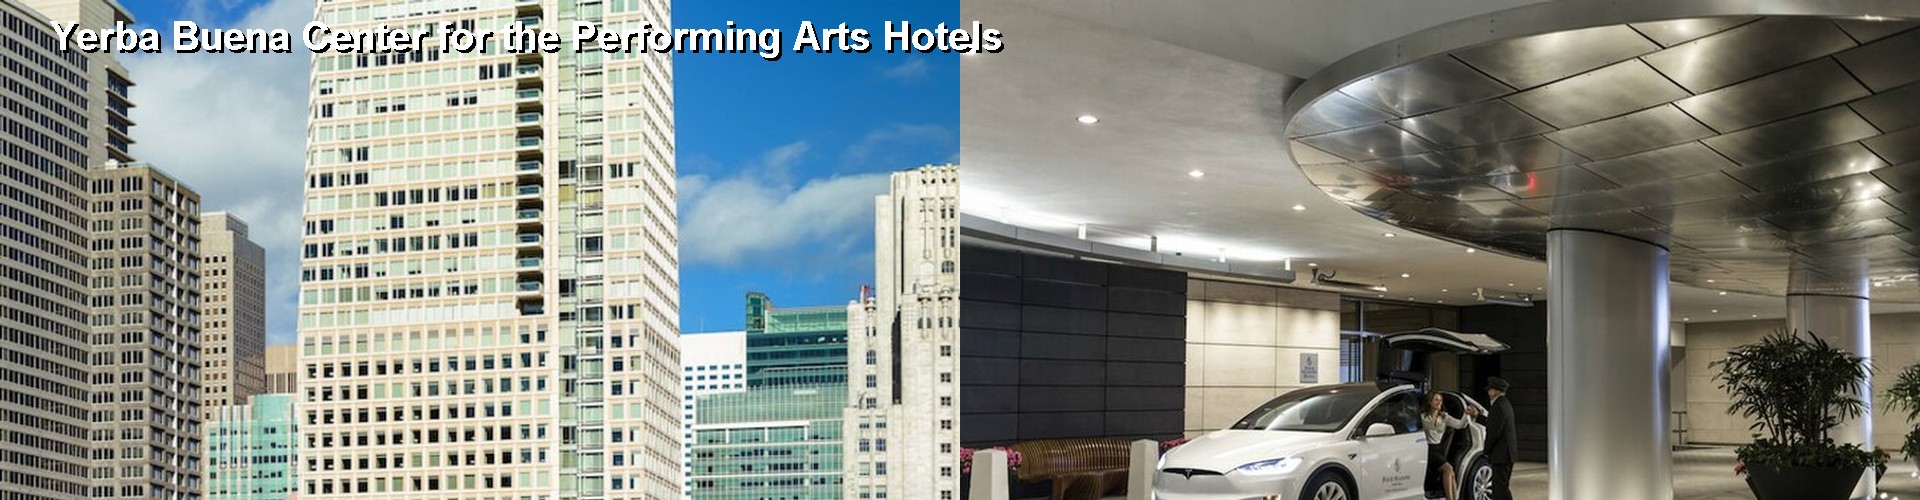 5 Best Hotels near Yerba Buena Center for the Performing Arts